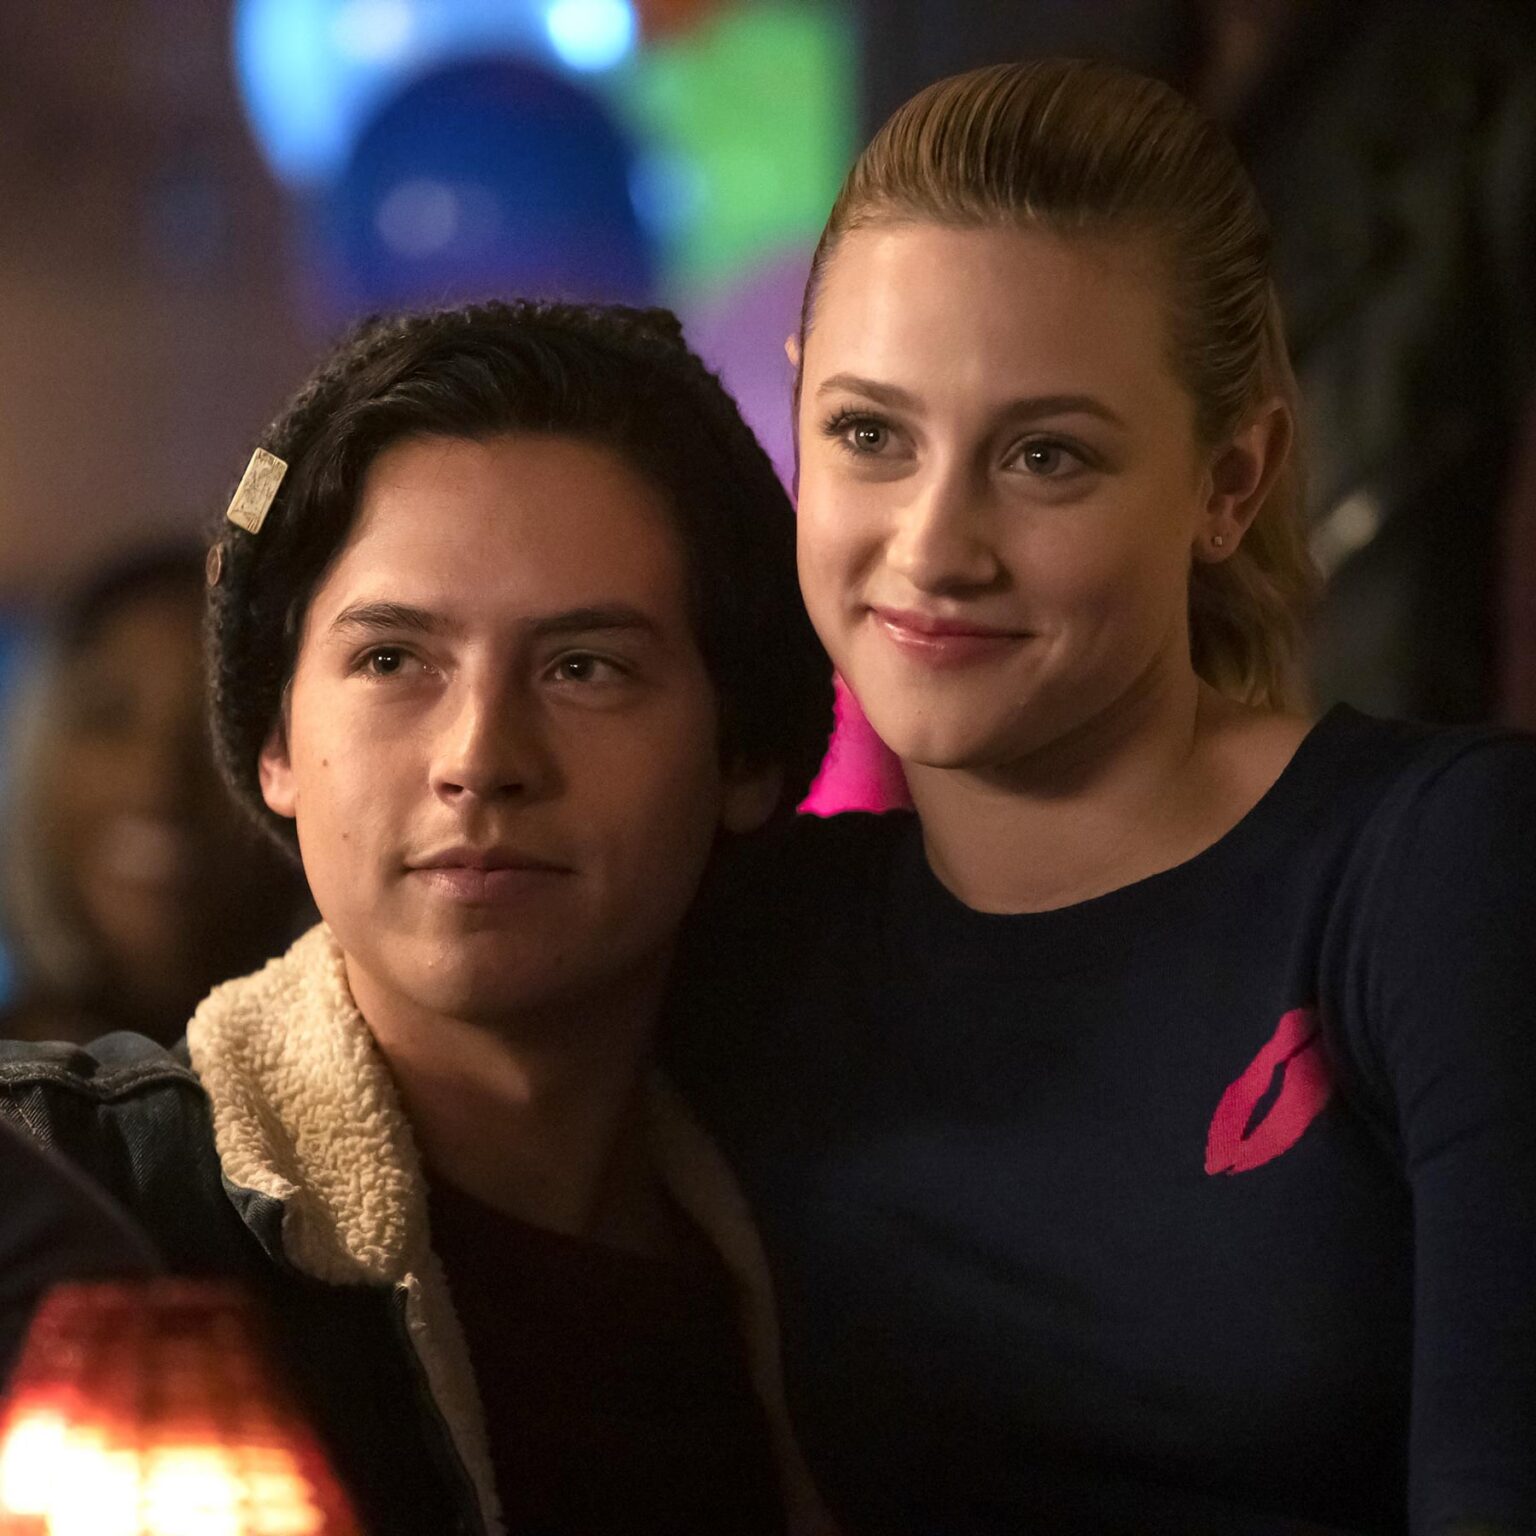 The CW has renewed Riverdale for season 5. Should we give the disastrous show a chance for redemption?